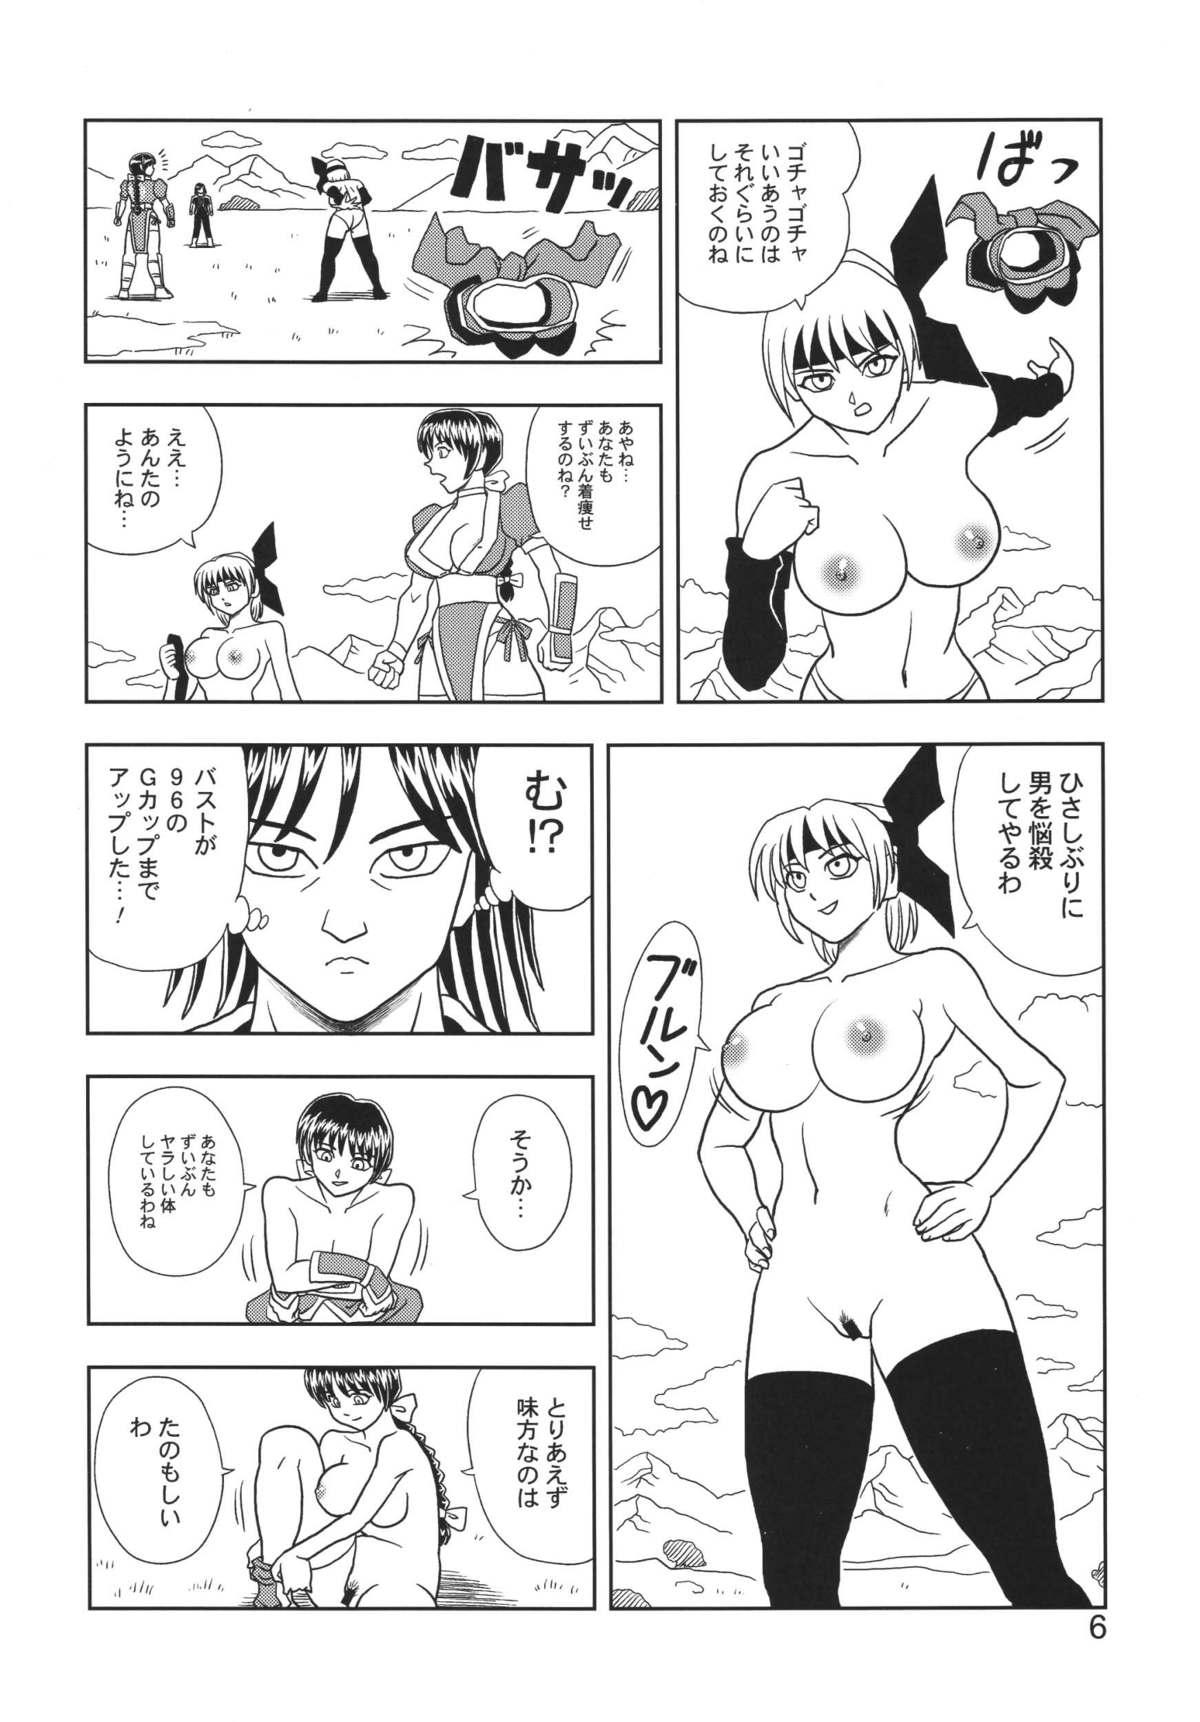 Jerk Kasumi or Ayane - Dead or alive Trap - Page 6